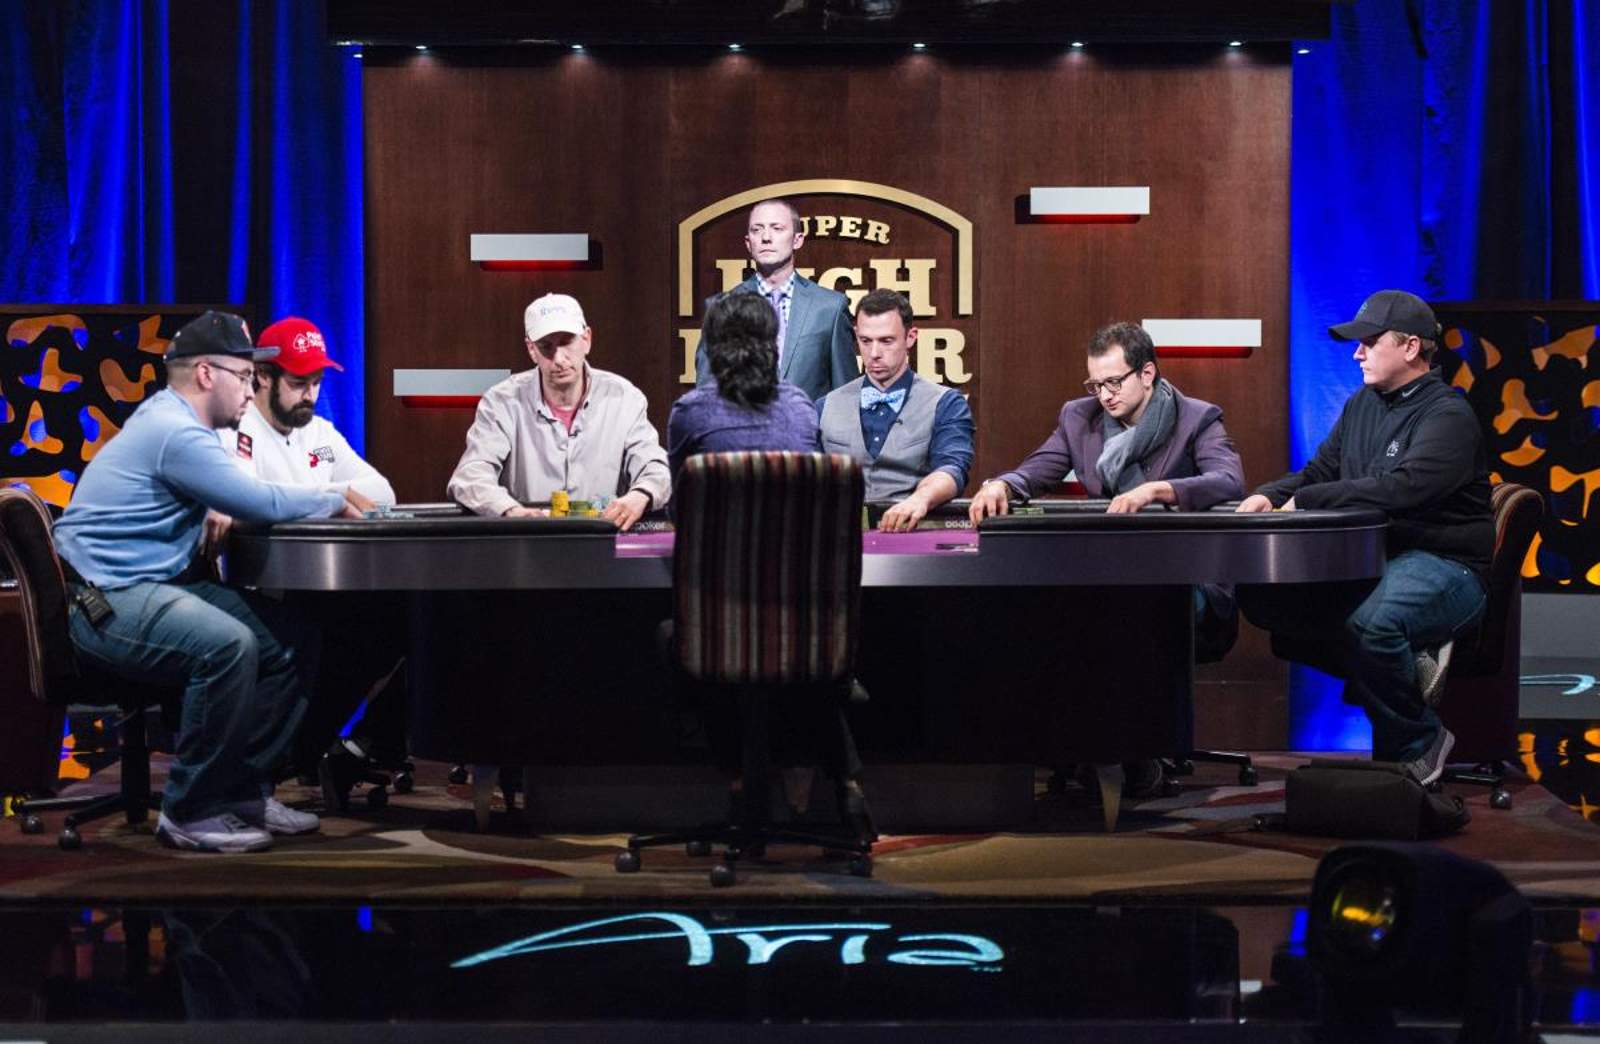 2017 Super High Roller Bowl Sold Out, 35 Names Announced